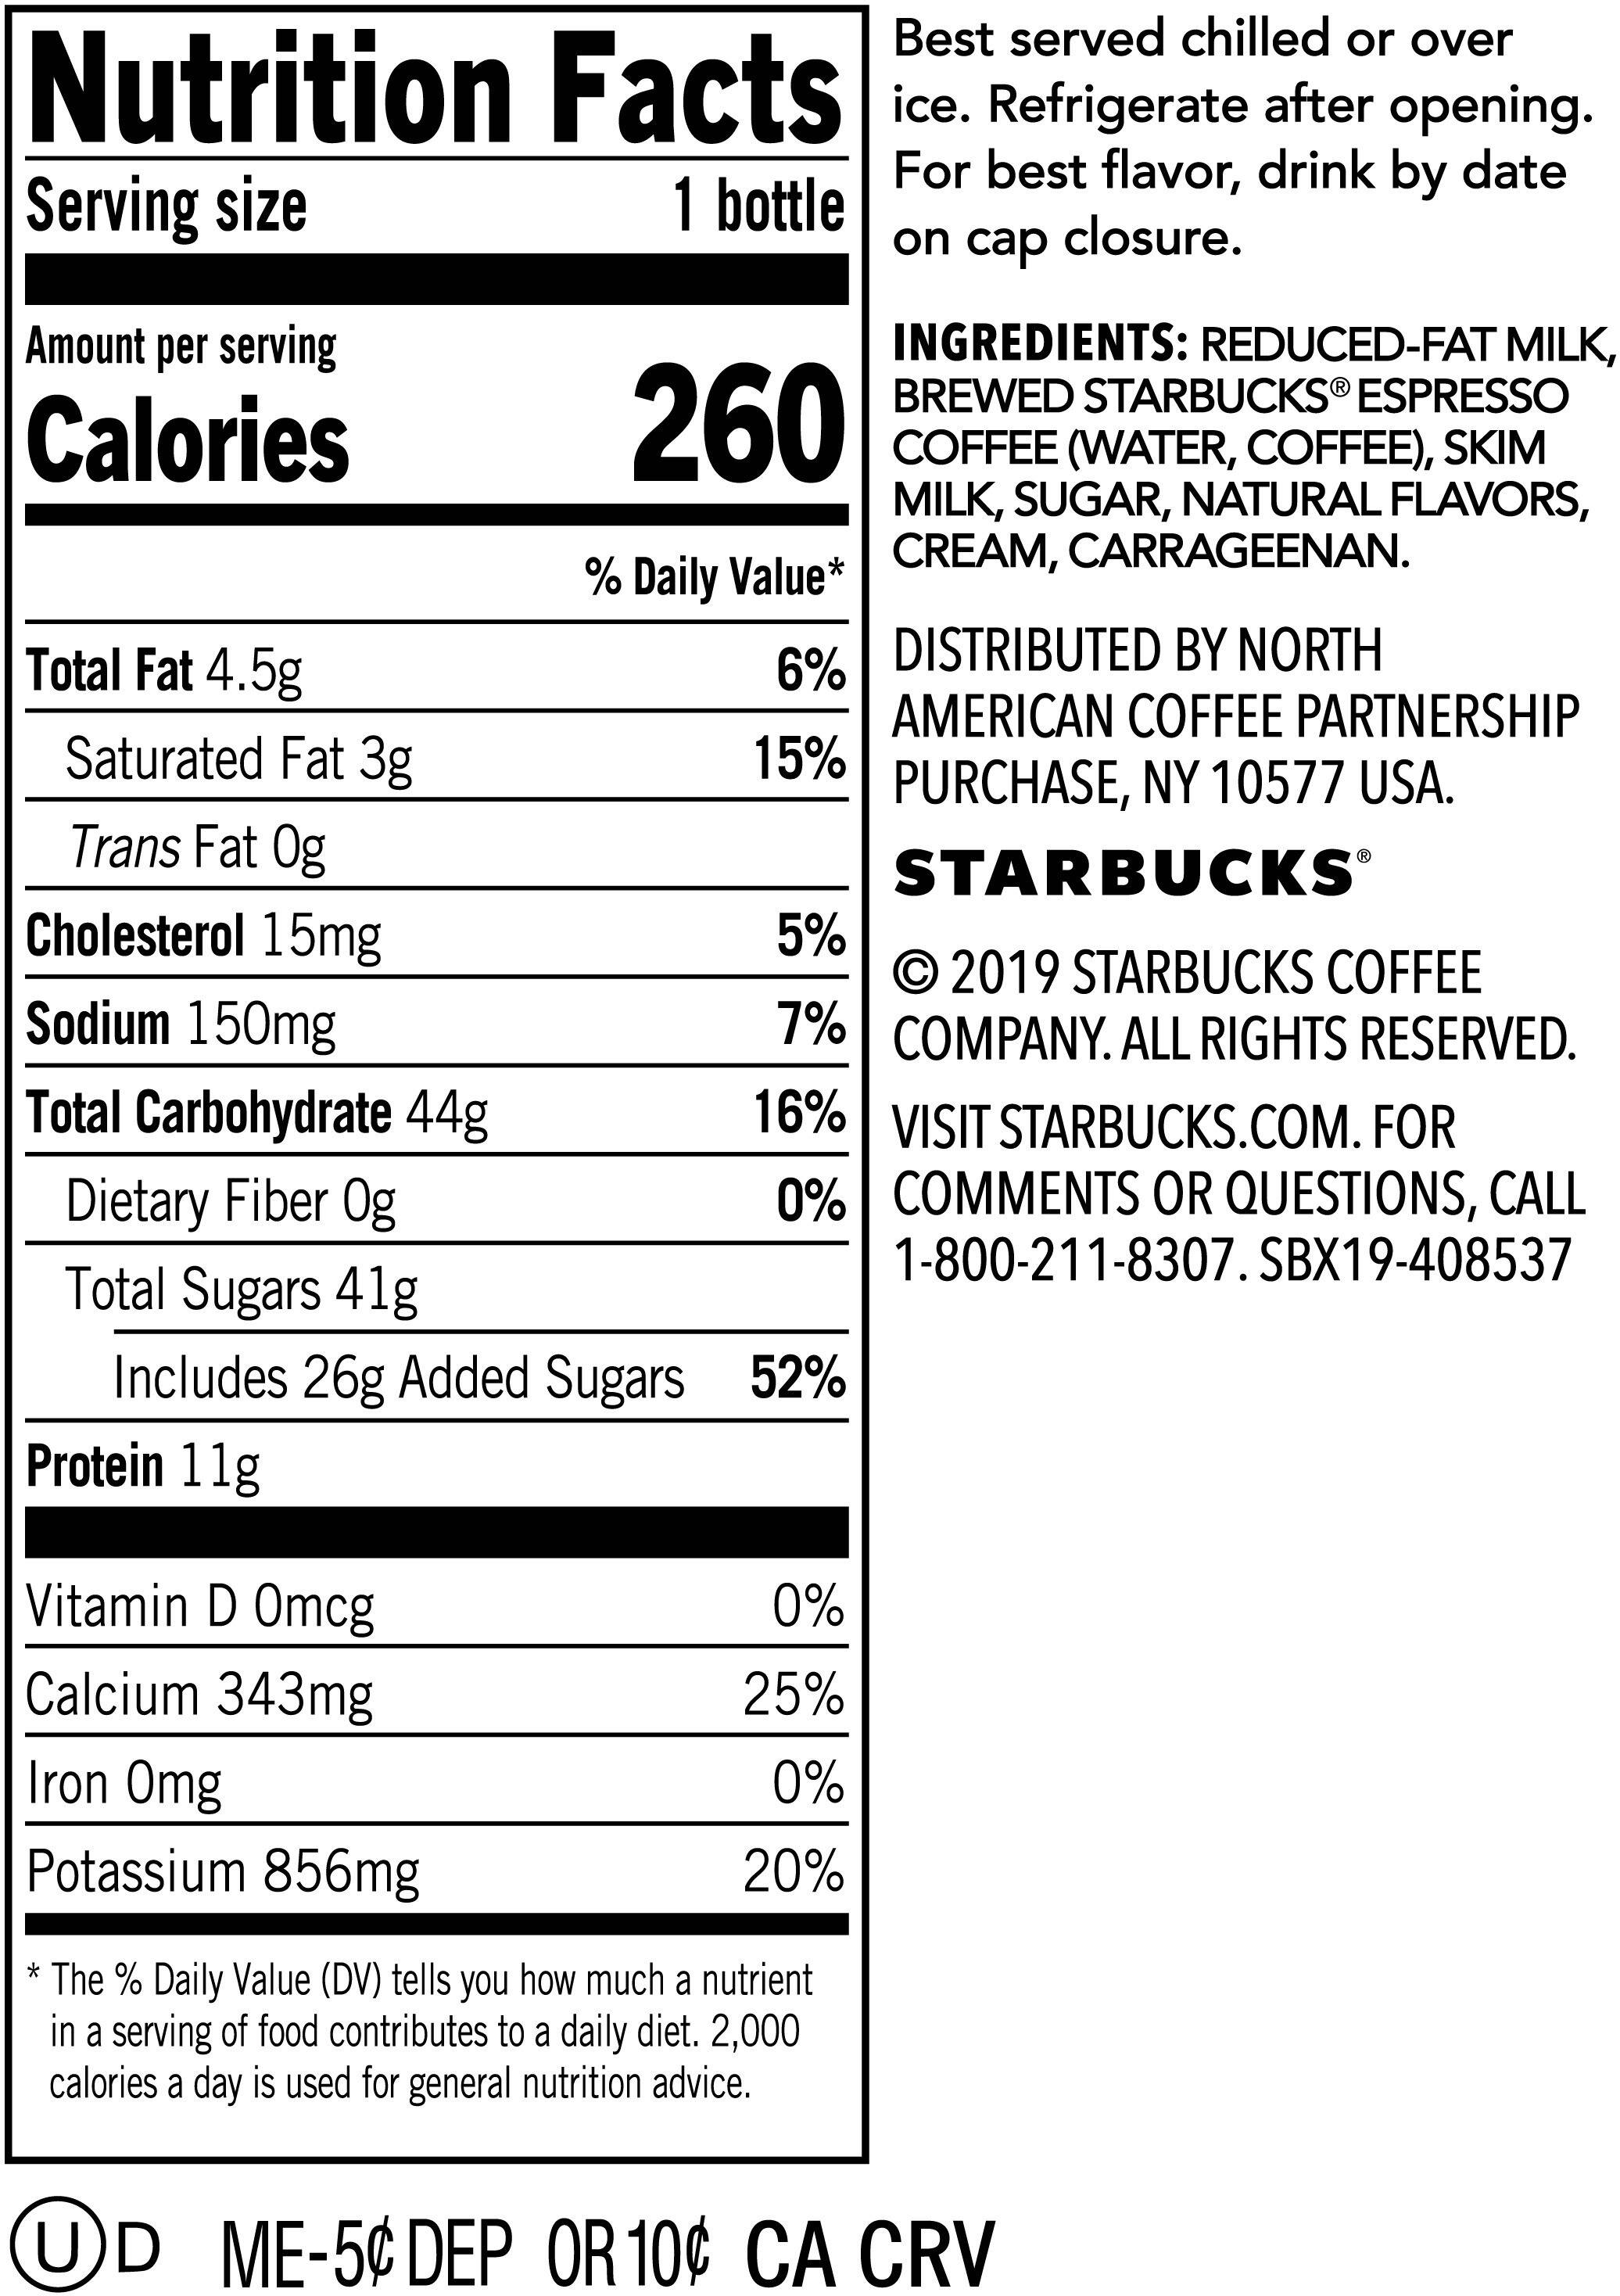 Image describing nutrition information for product Starbucks White Chocolate Mocha Iced Latte